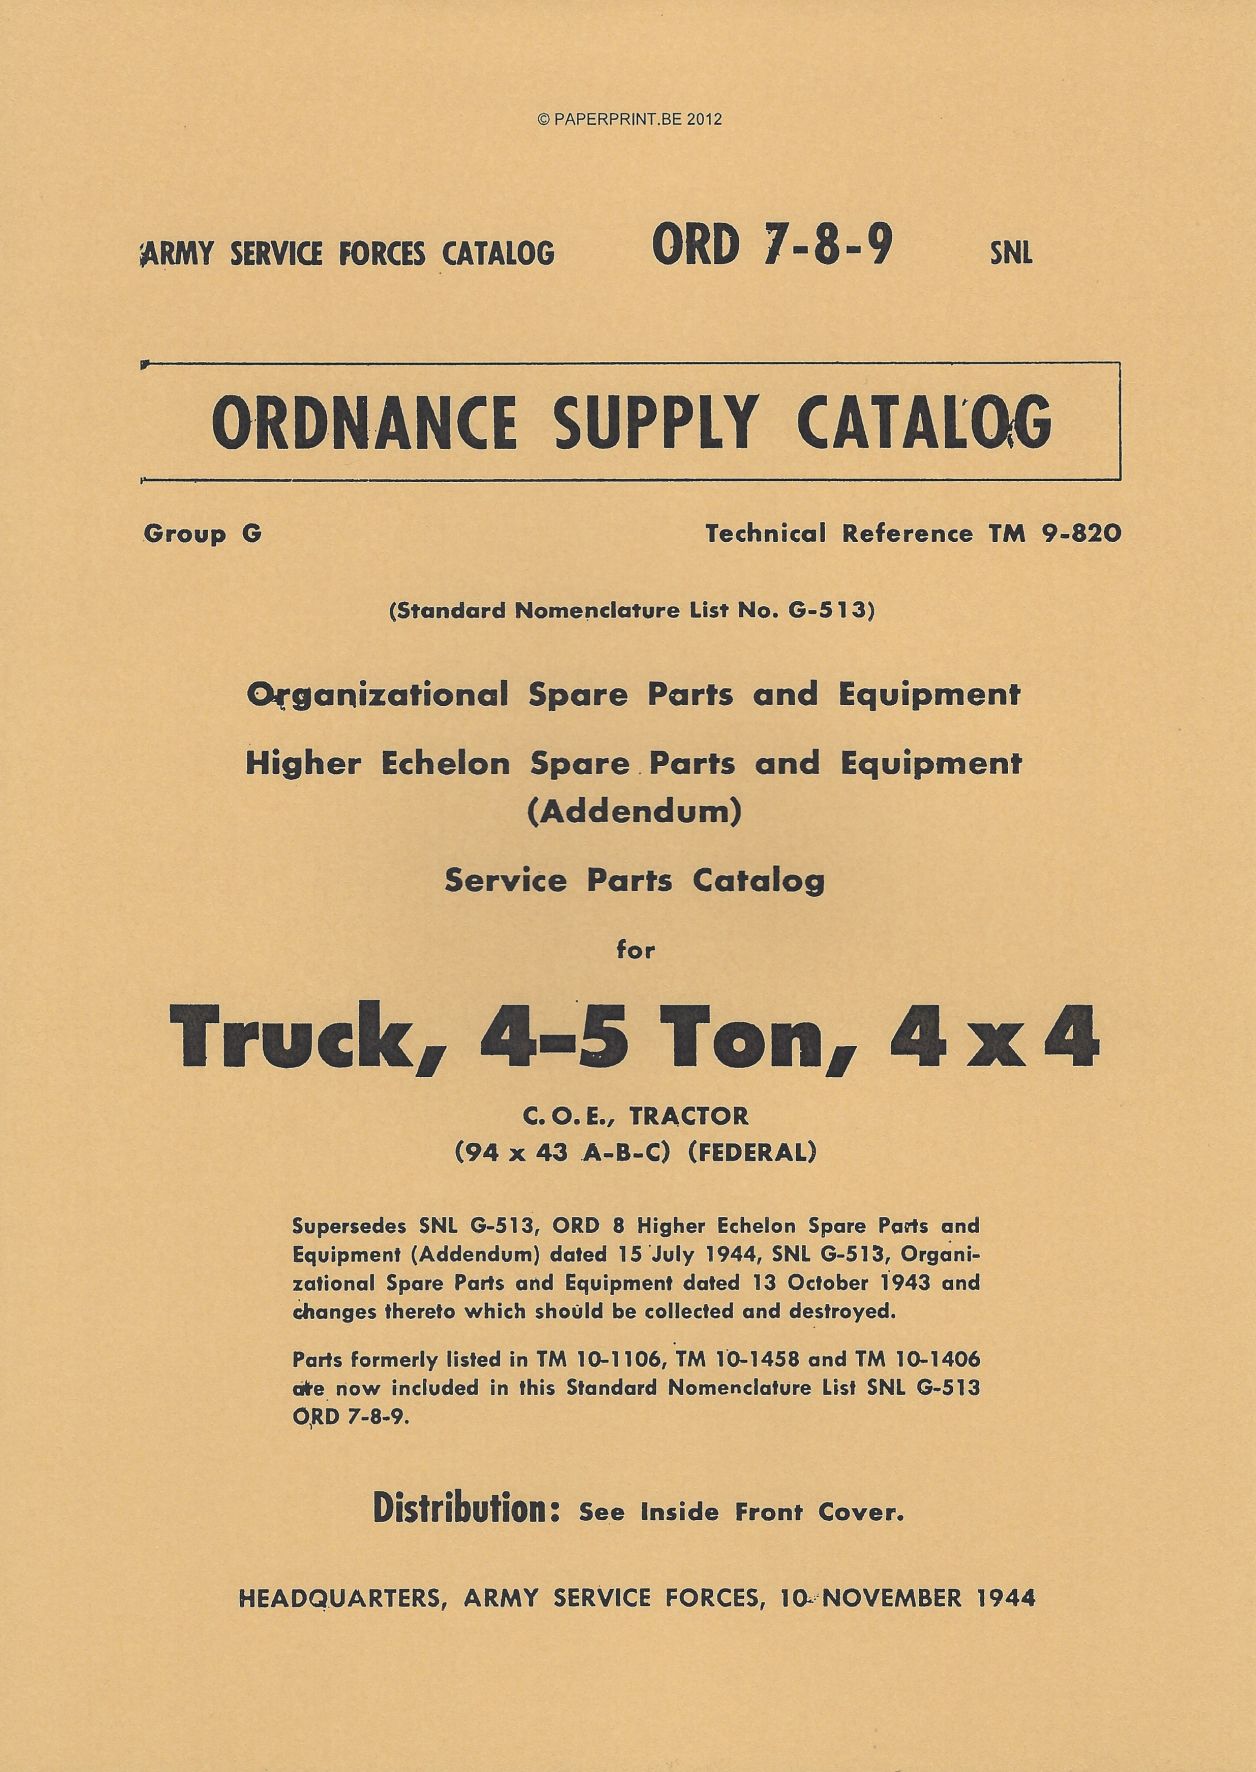 SNL G-513 US SERVICE PARTS CATALOG FOR TRUCK, 4-5 TON, 4x4 C.O.E TRACTOR (94 x 43 A-B-C) (FEDERAL)